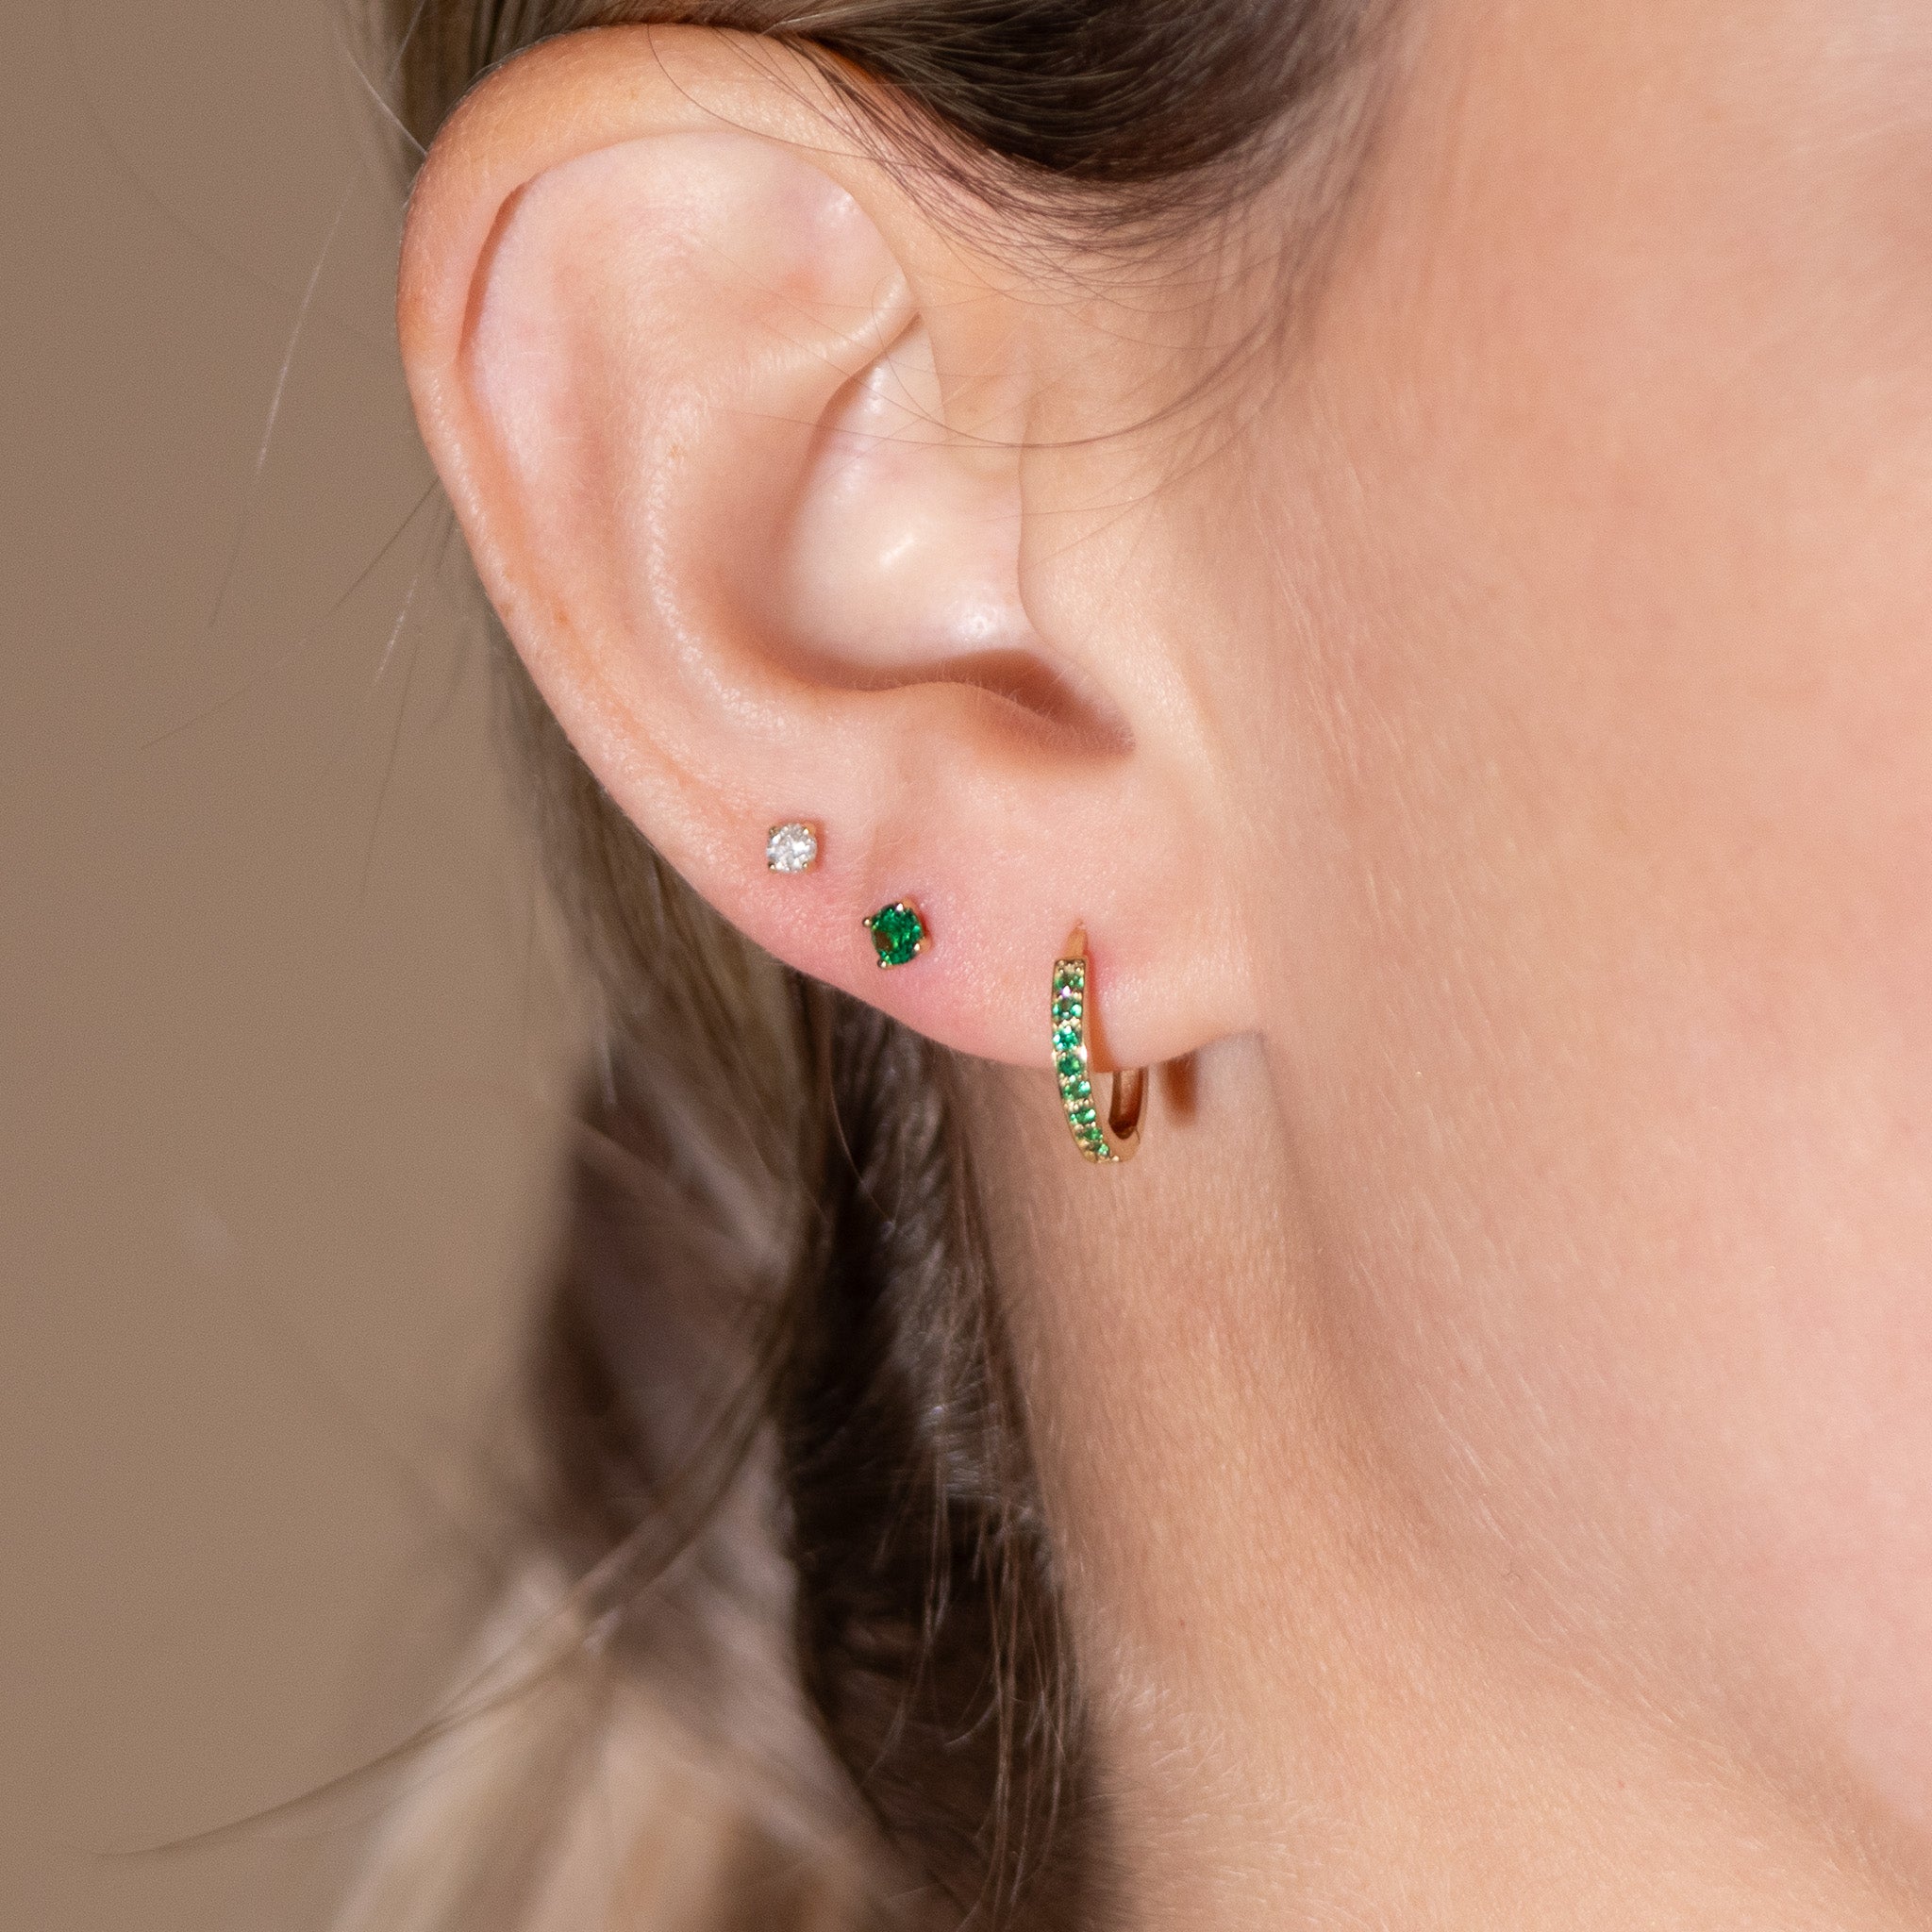 Emerald Cartilage Hoop Earring Earrings Estella Collection #product_description# 18364 Birthstone Birthstone Earrings Birthstone Jewelry #tag4# #tag5# #tag6# #tag7# #tag8# #tag9# #tag10#